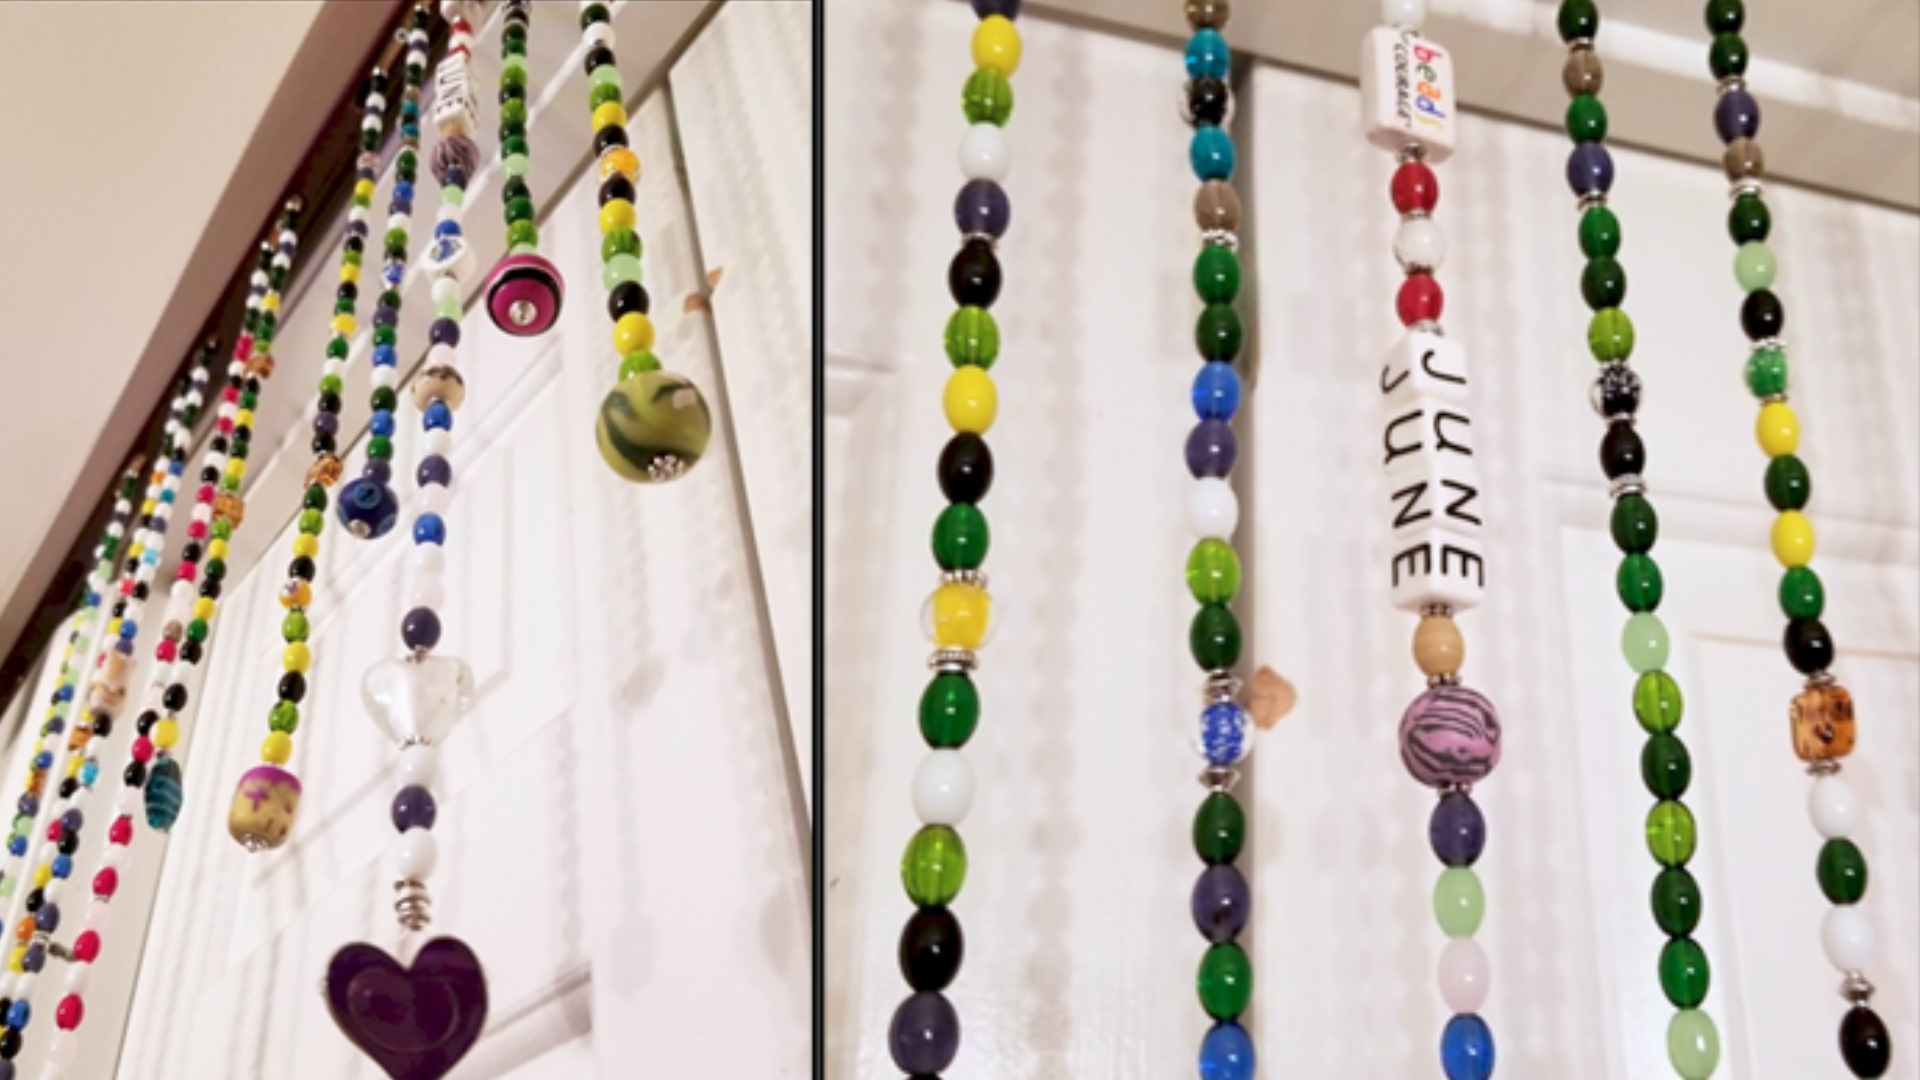 June's Beads of Courage strands hung in her home to honor her after she died.